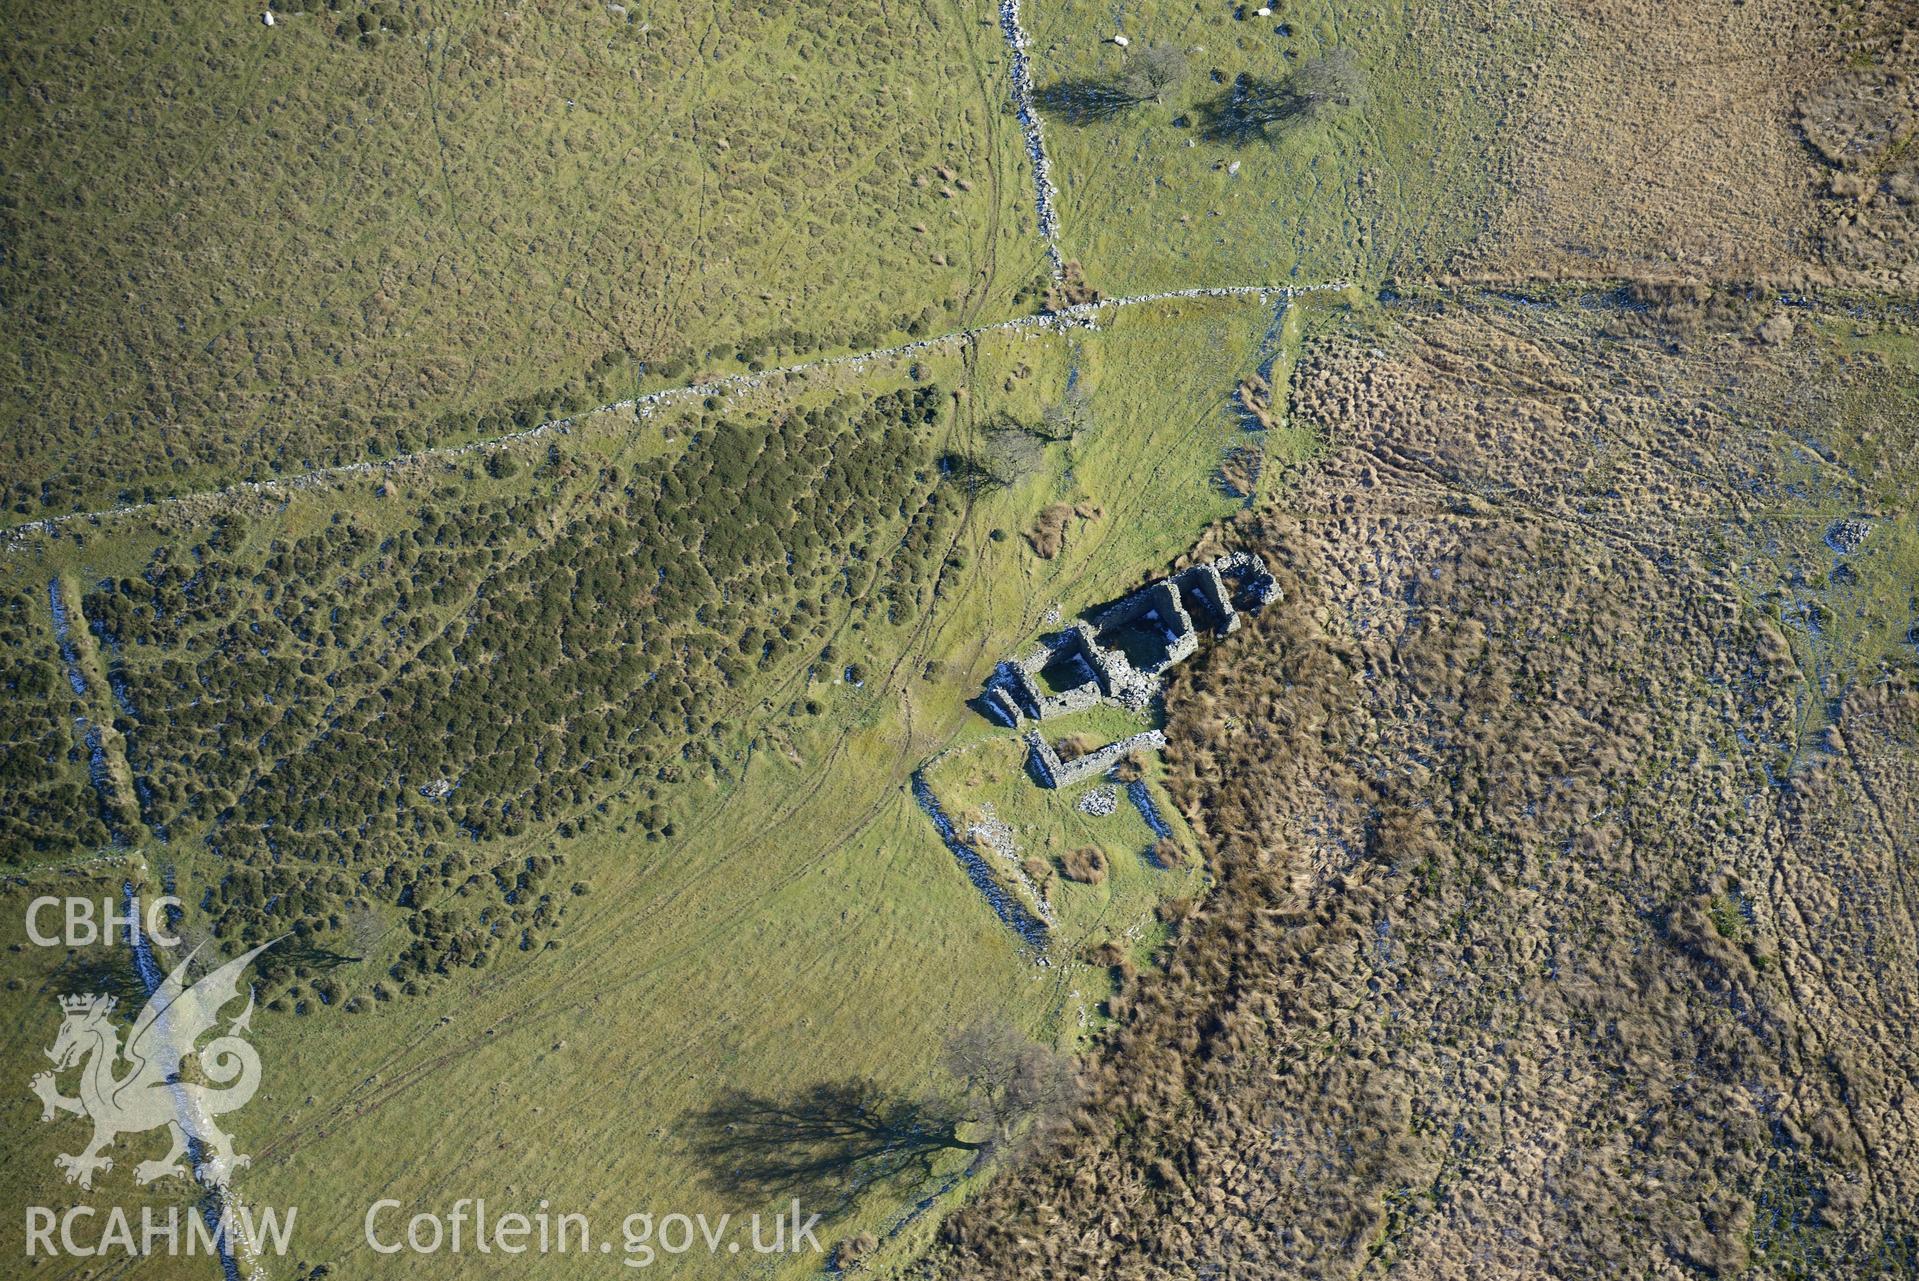 Ruins of Ochr Bryn Lloi farmhouse, east of Tregaron. Oblique aerial photograph taken during the Royal Commission's programme of archaeological aerial reconnaissance by Toby Driver on 4th February 2015.